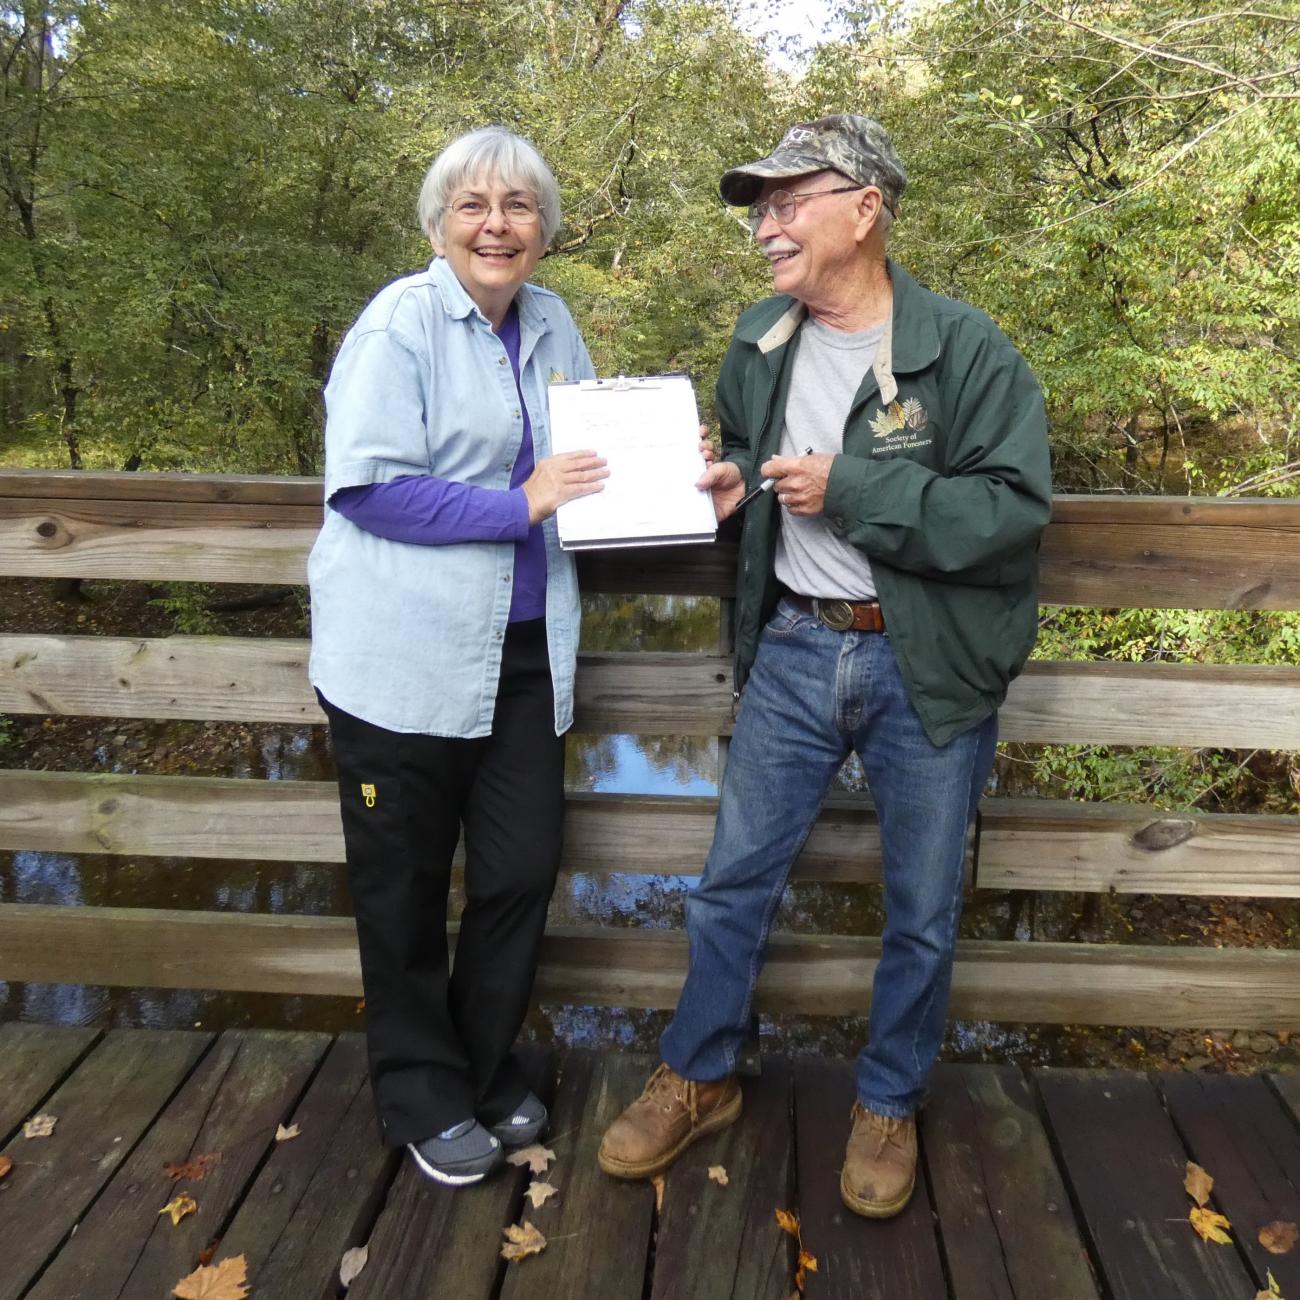 Mary and Judd Edeburn at a bridge in Duke Forest after signing their bequest intention.